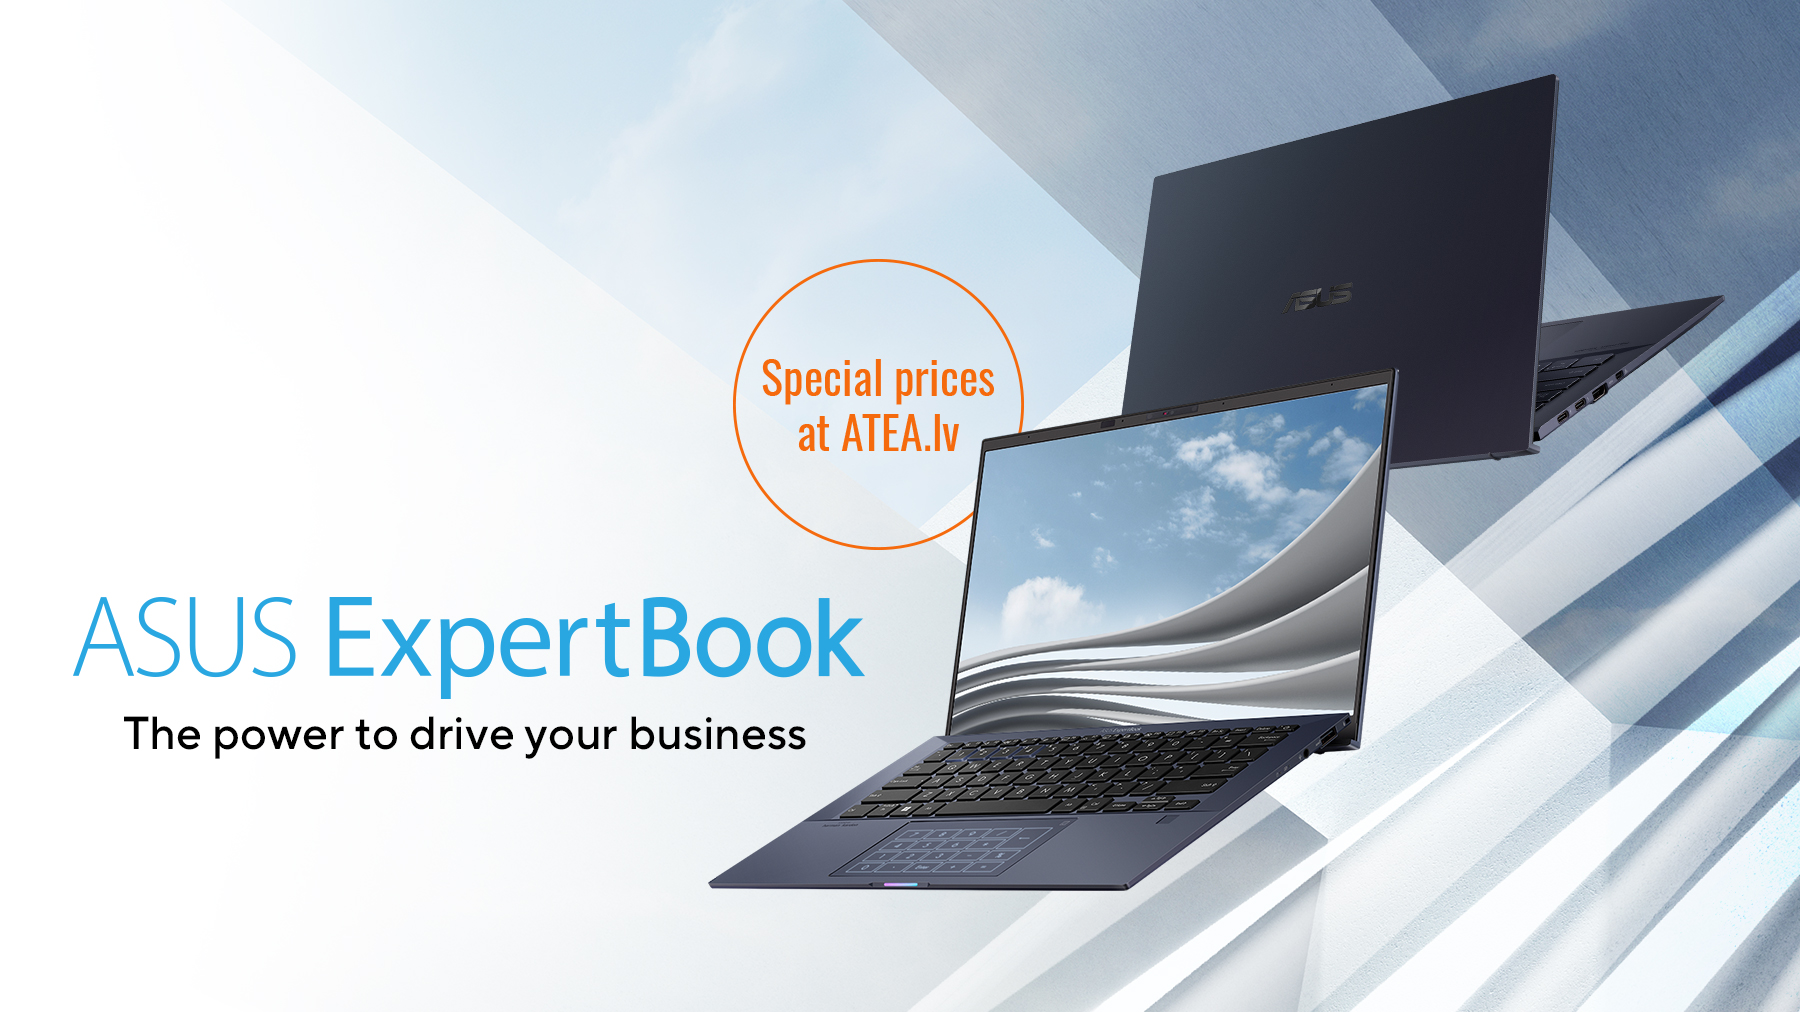 New promotion in ATEA e-shop: special prices for ExpertBook laptops for the registered users. 